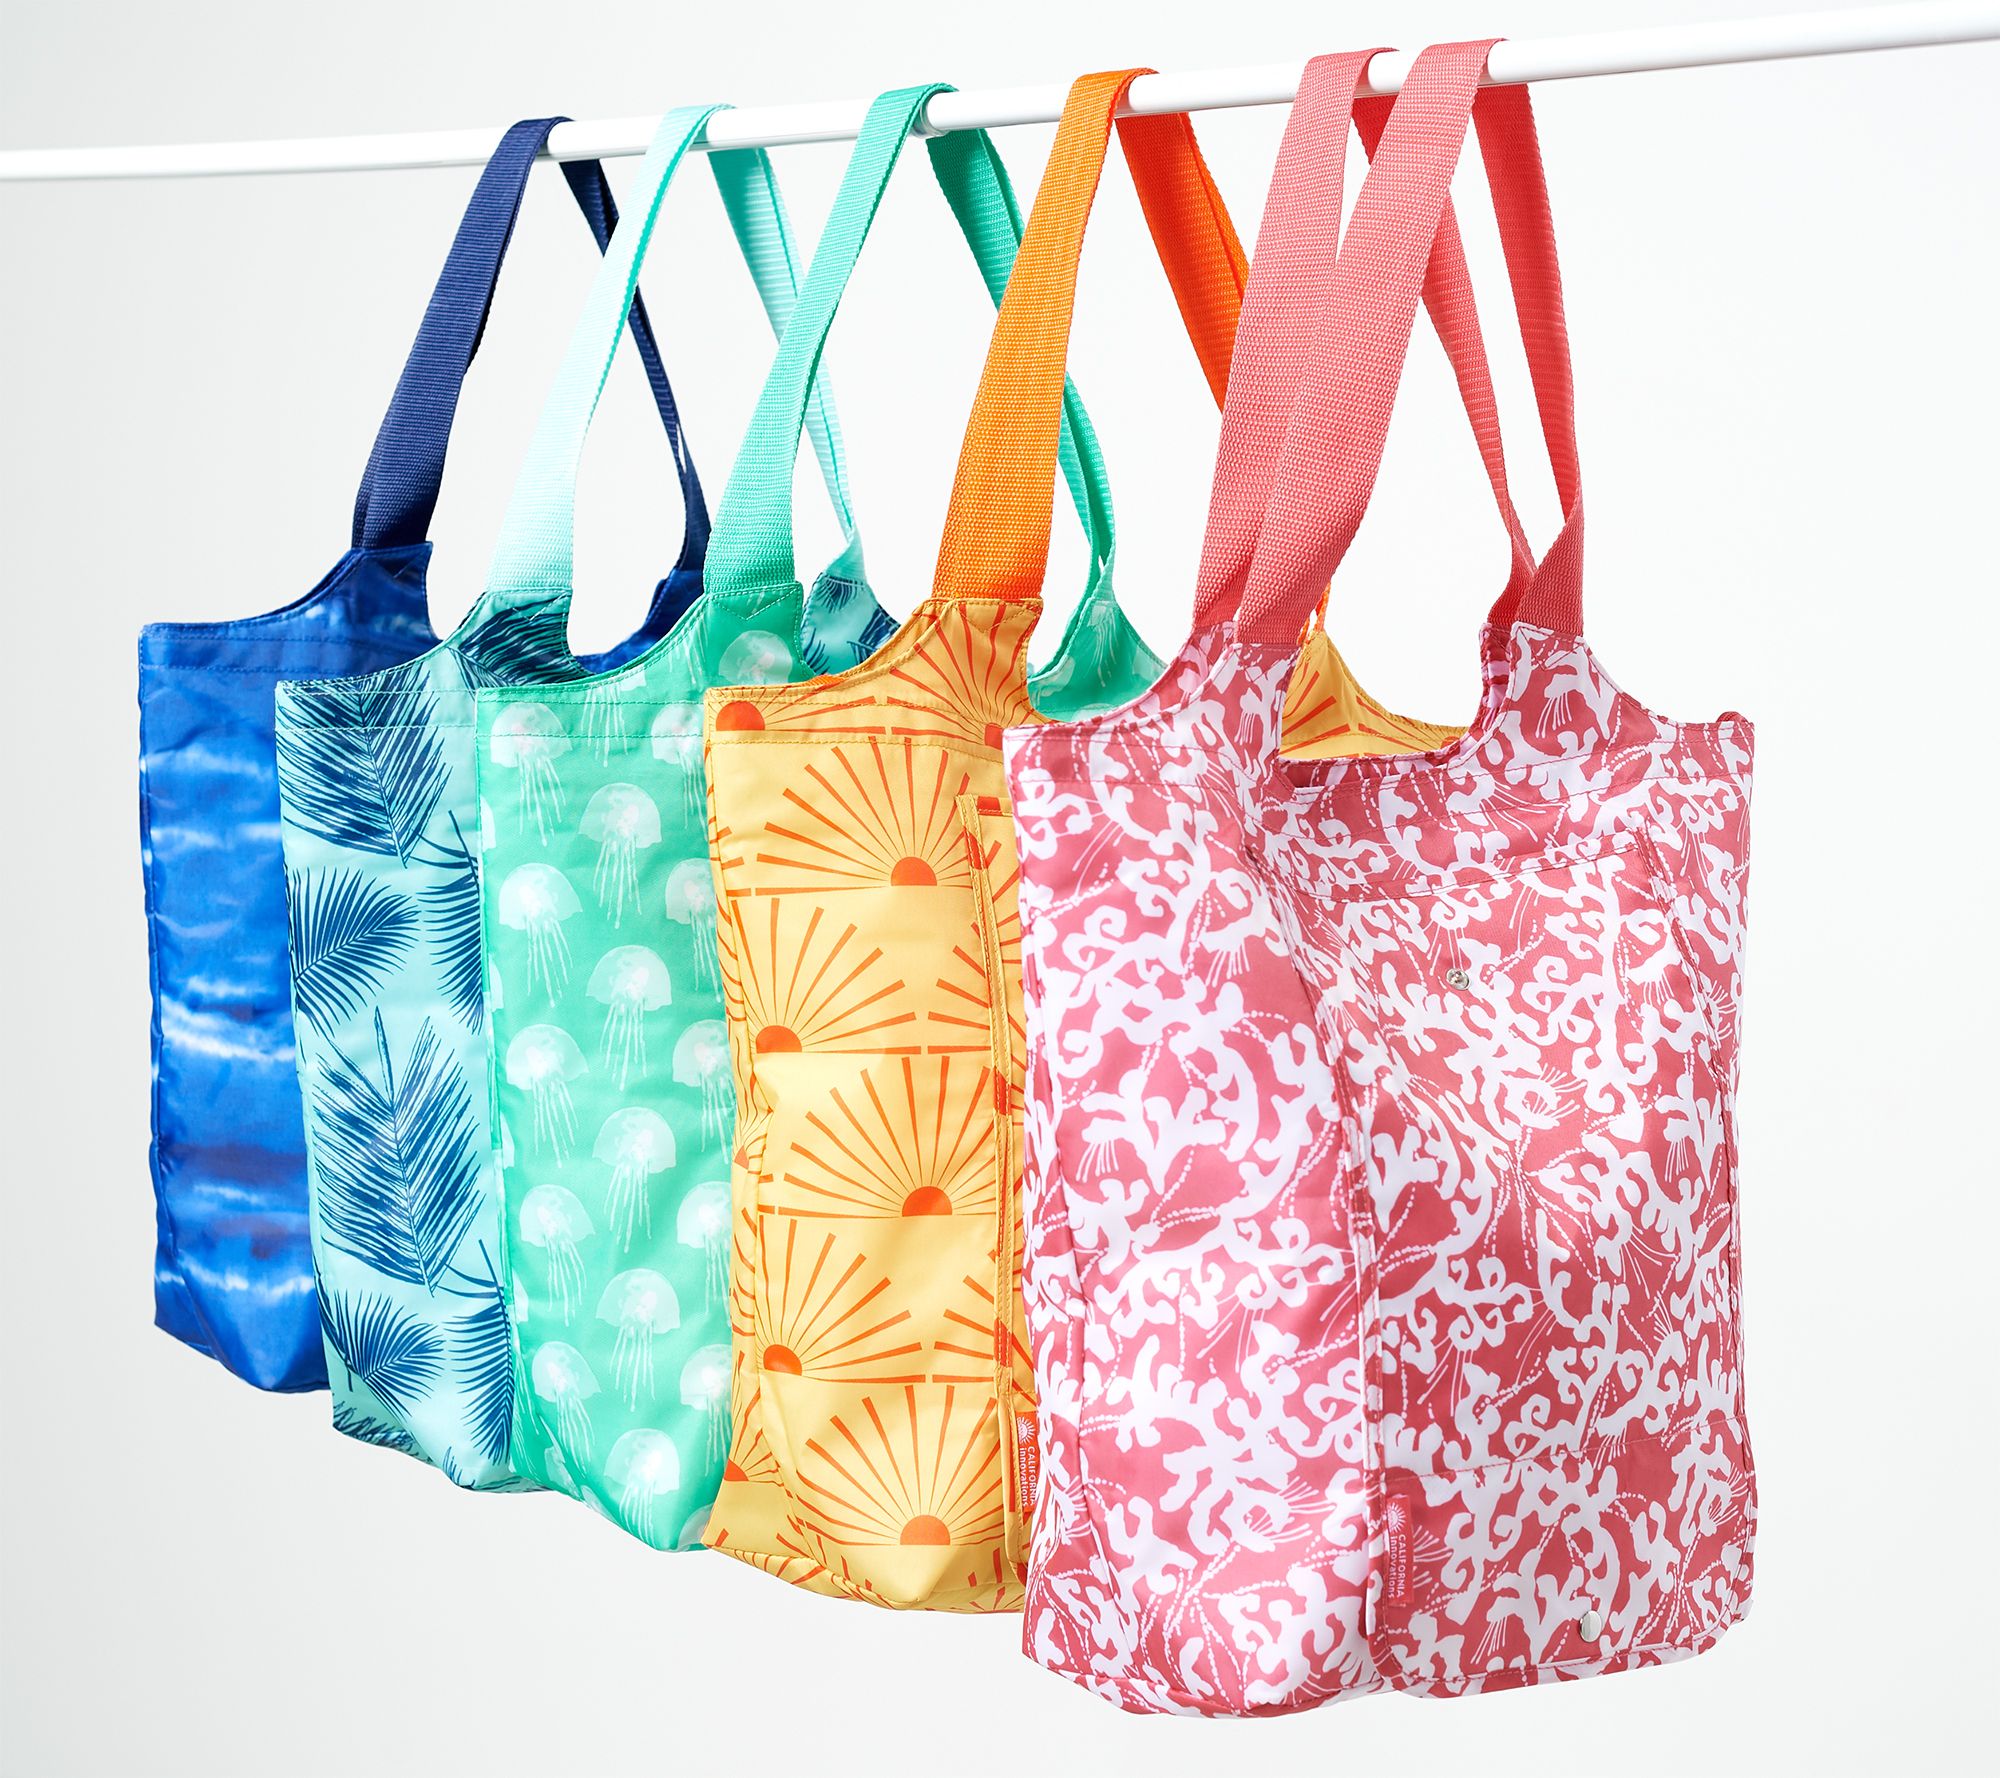 California Innovations Set of 5 Insulated Market Totes - Ex Ten